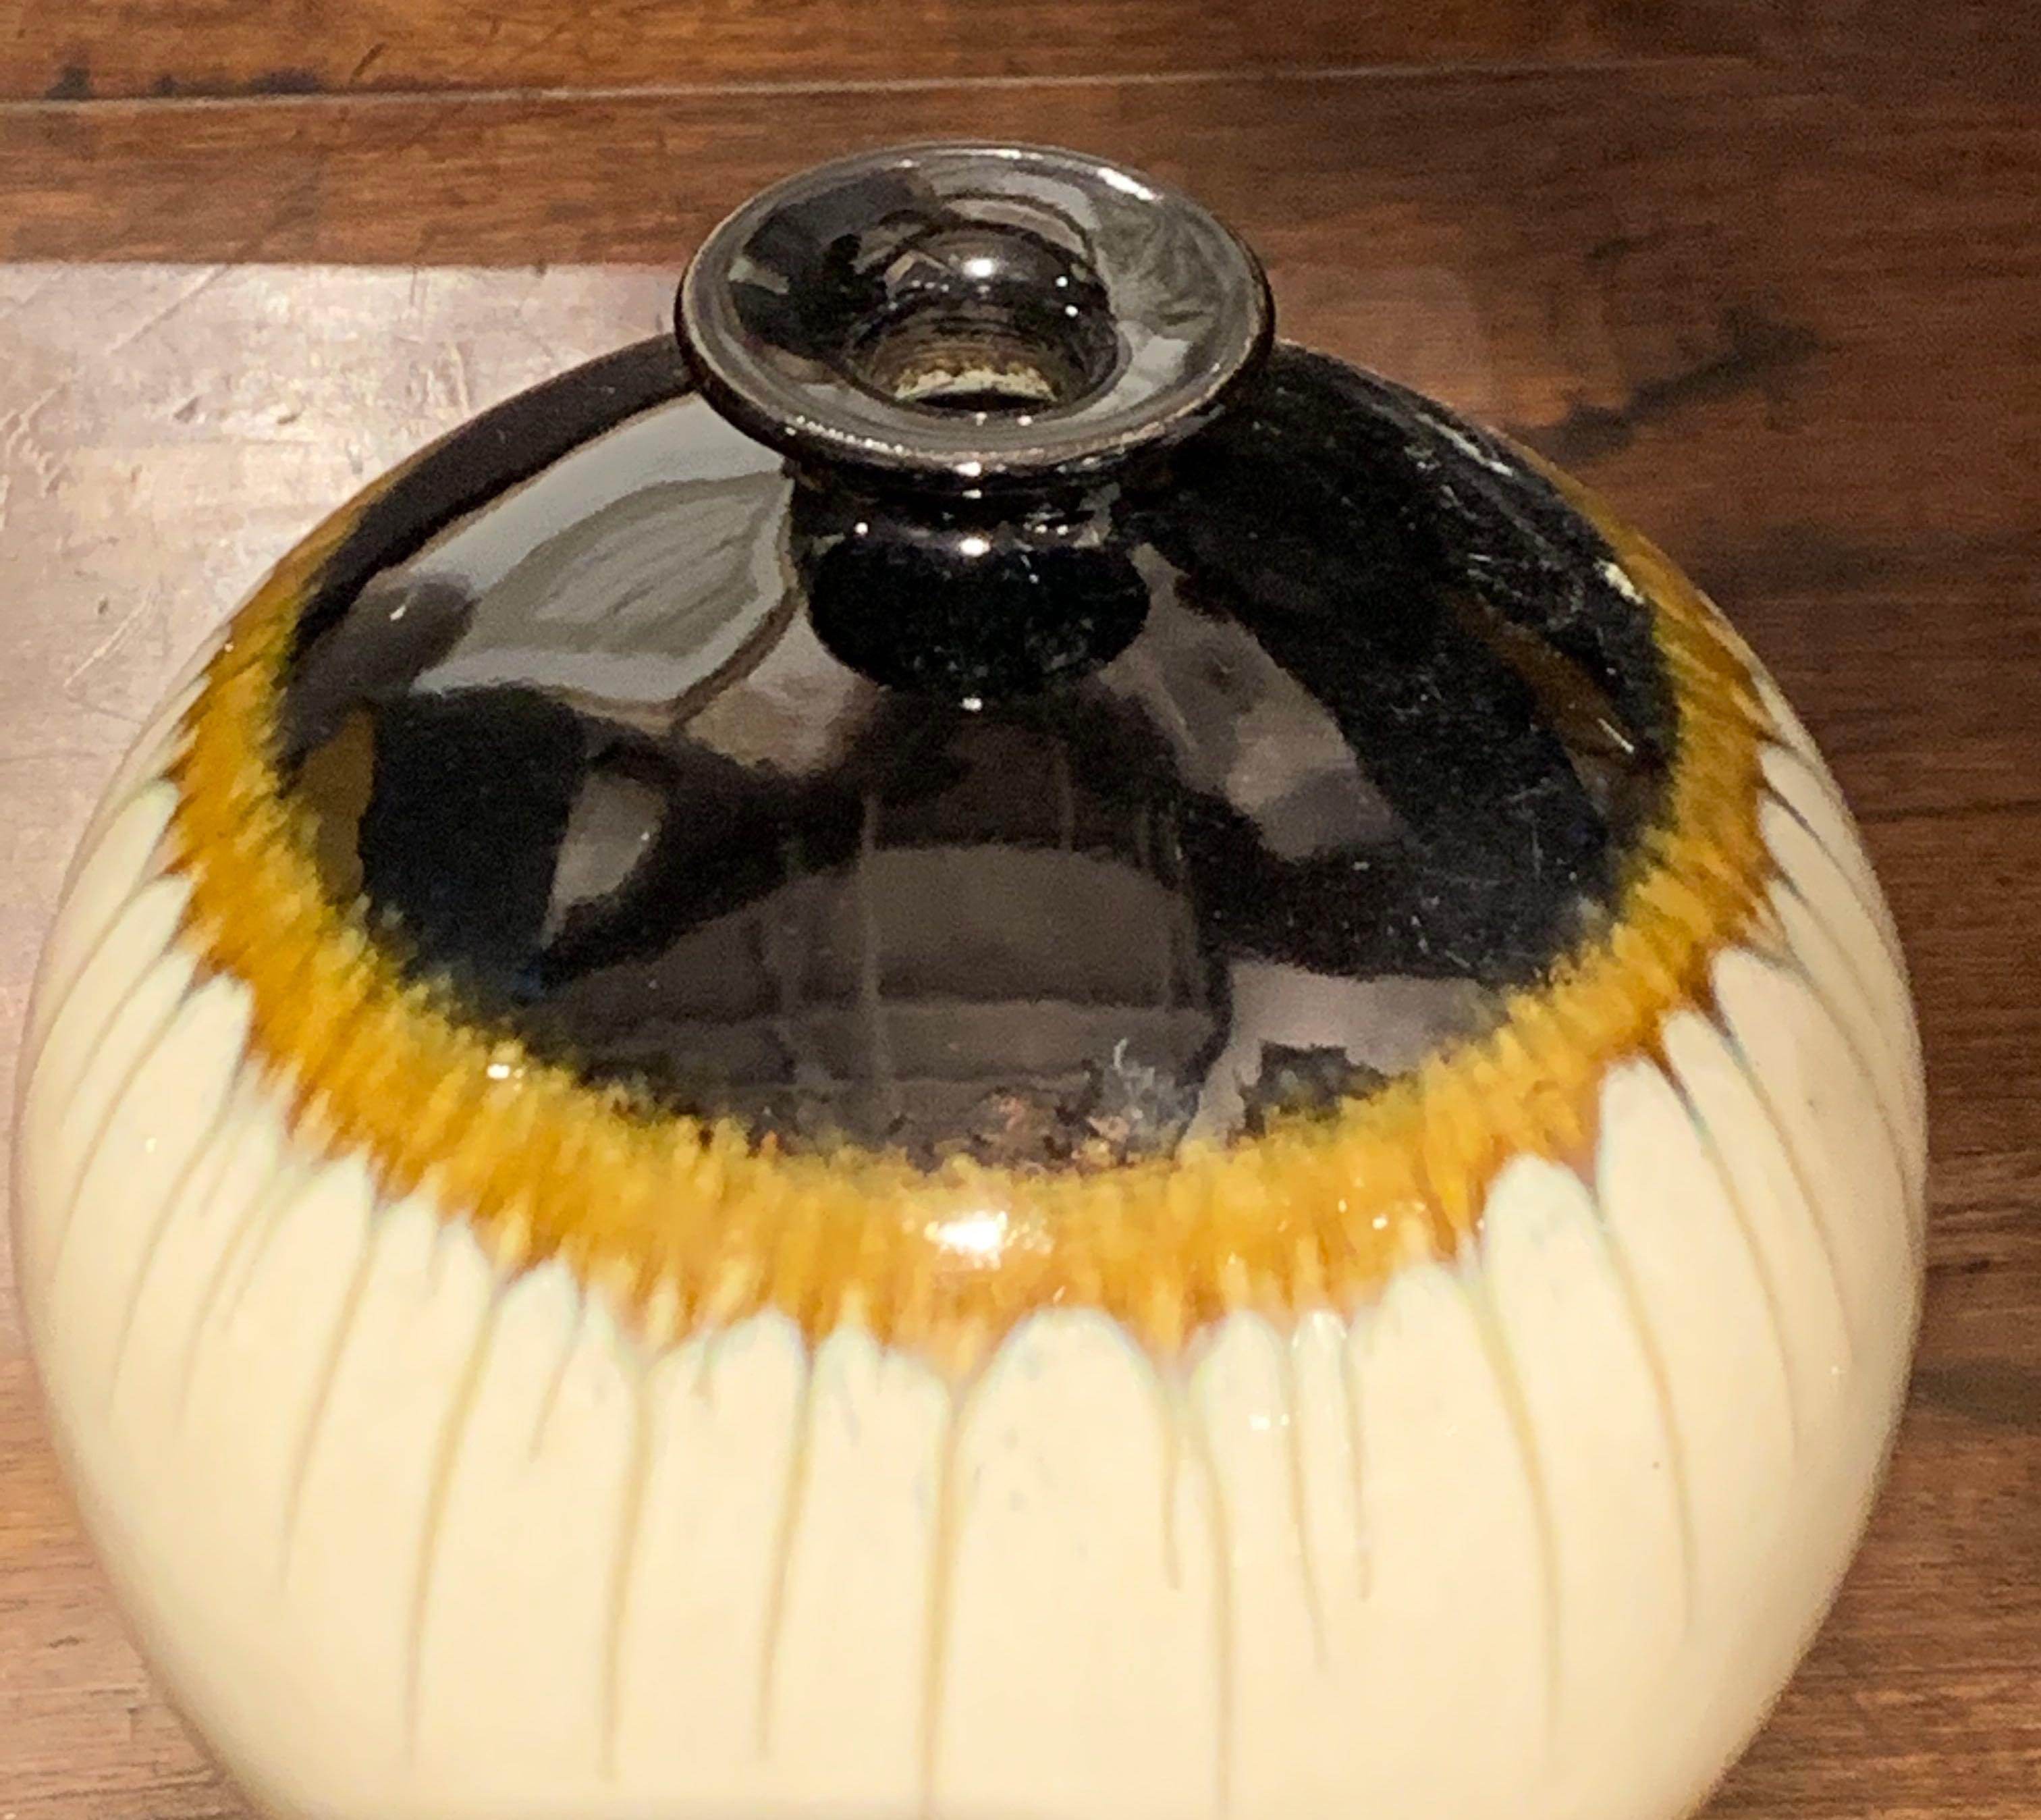 Contemporary Chinese ceramic vase with decorative drip glaze.
The shape is round with a narrow top. Shades of taupe, cream and dark brown/black.
Uneven horizontal line in the middle of the vase.


 